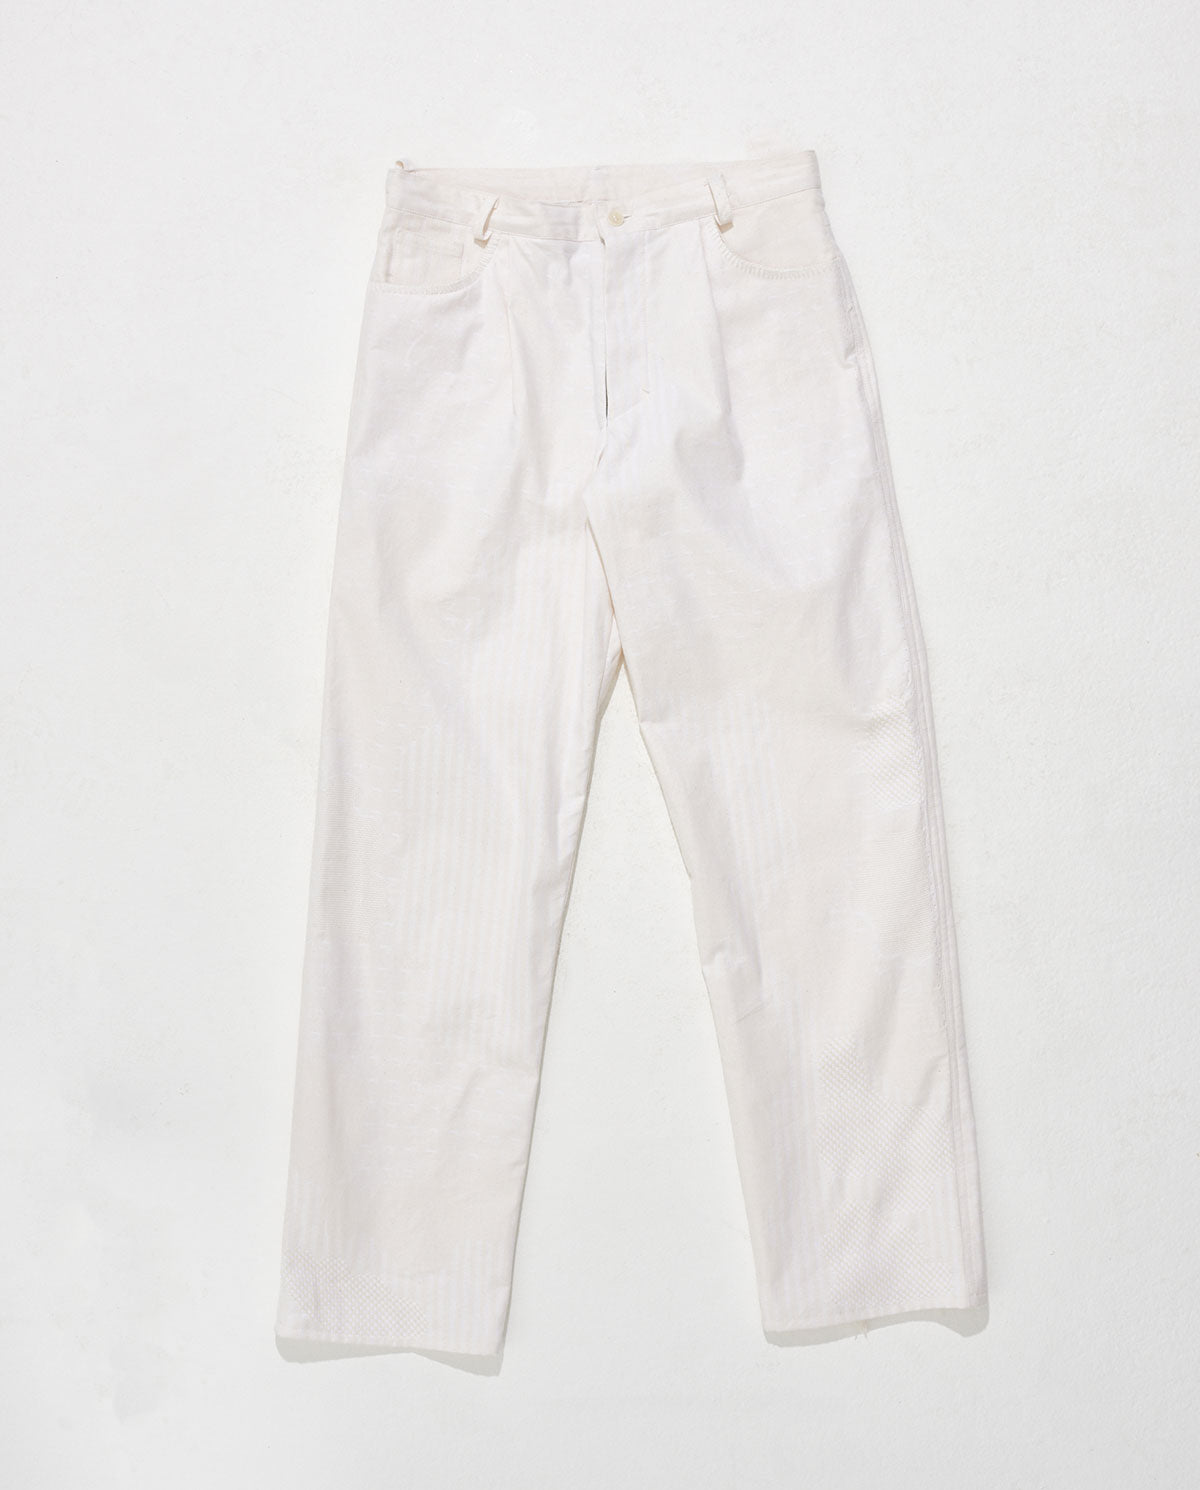 Edition 1 Trousers - Fringes on the Inside